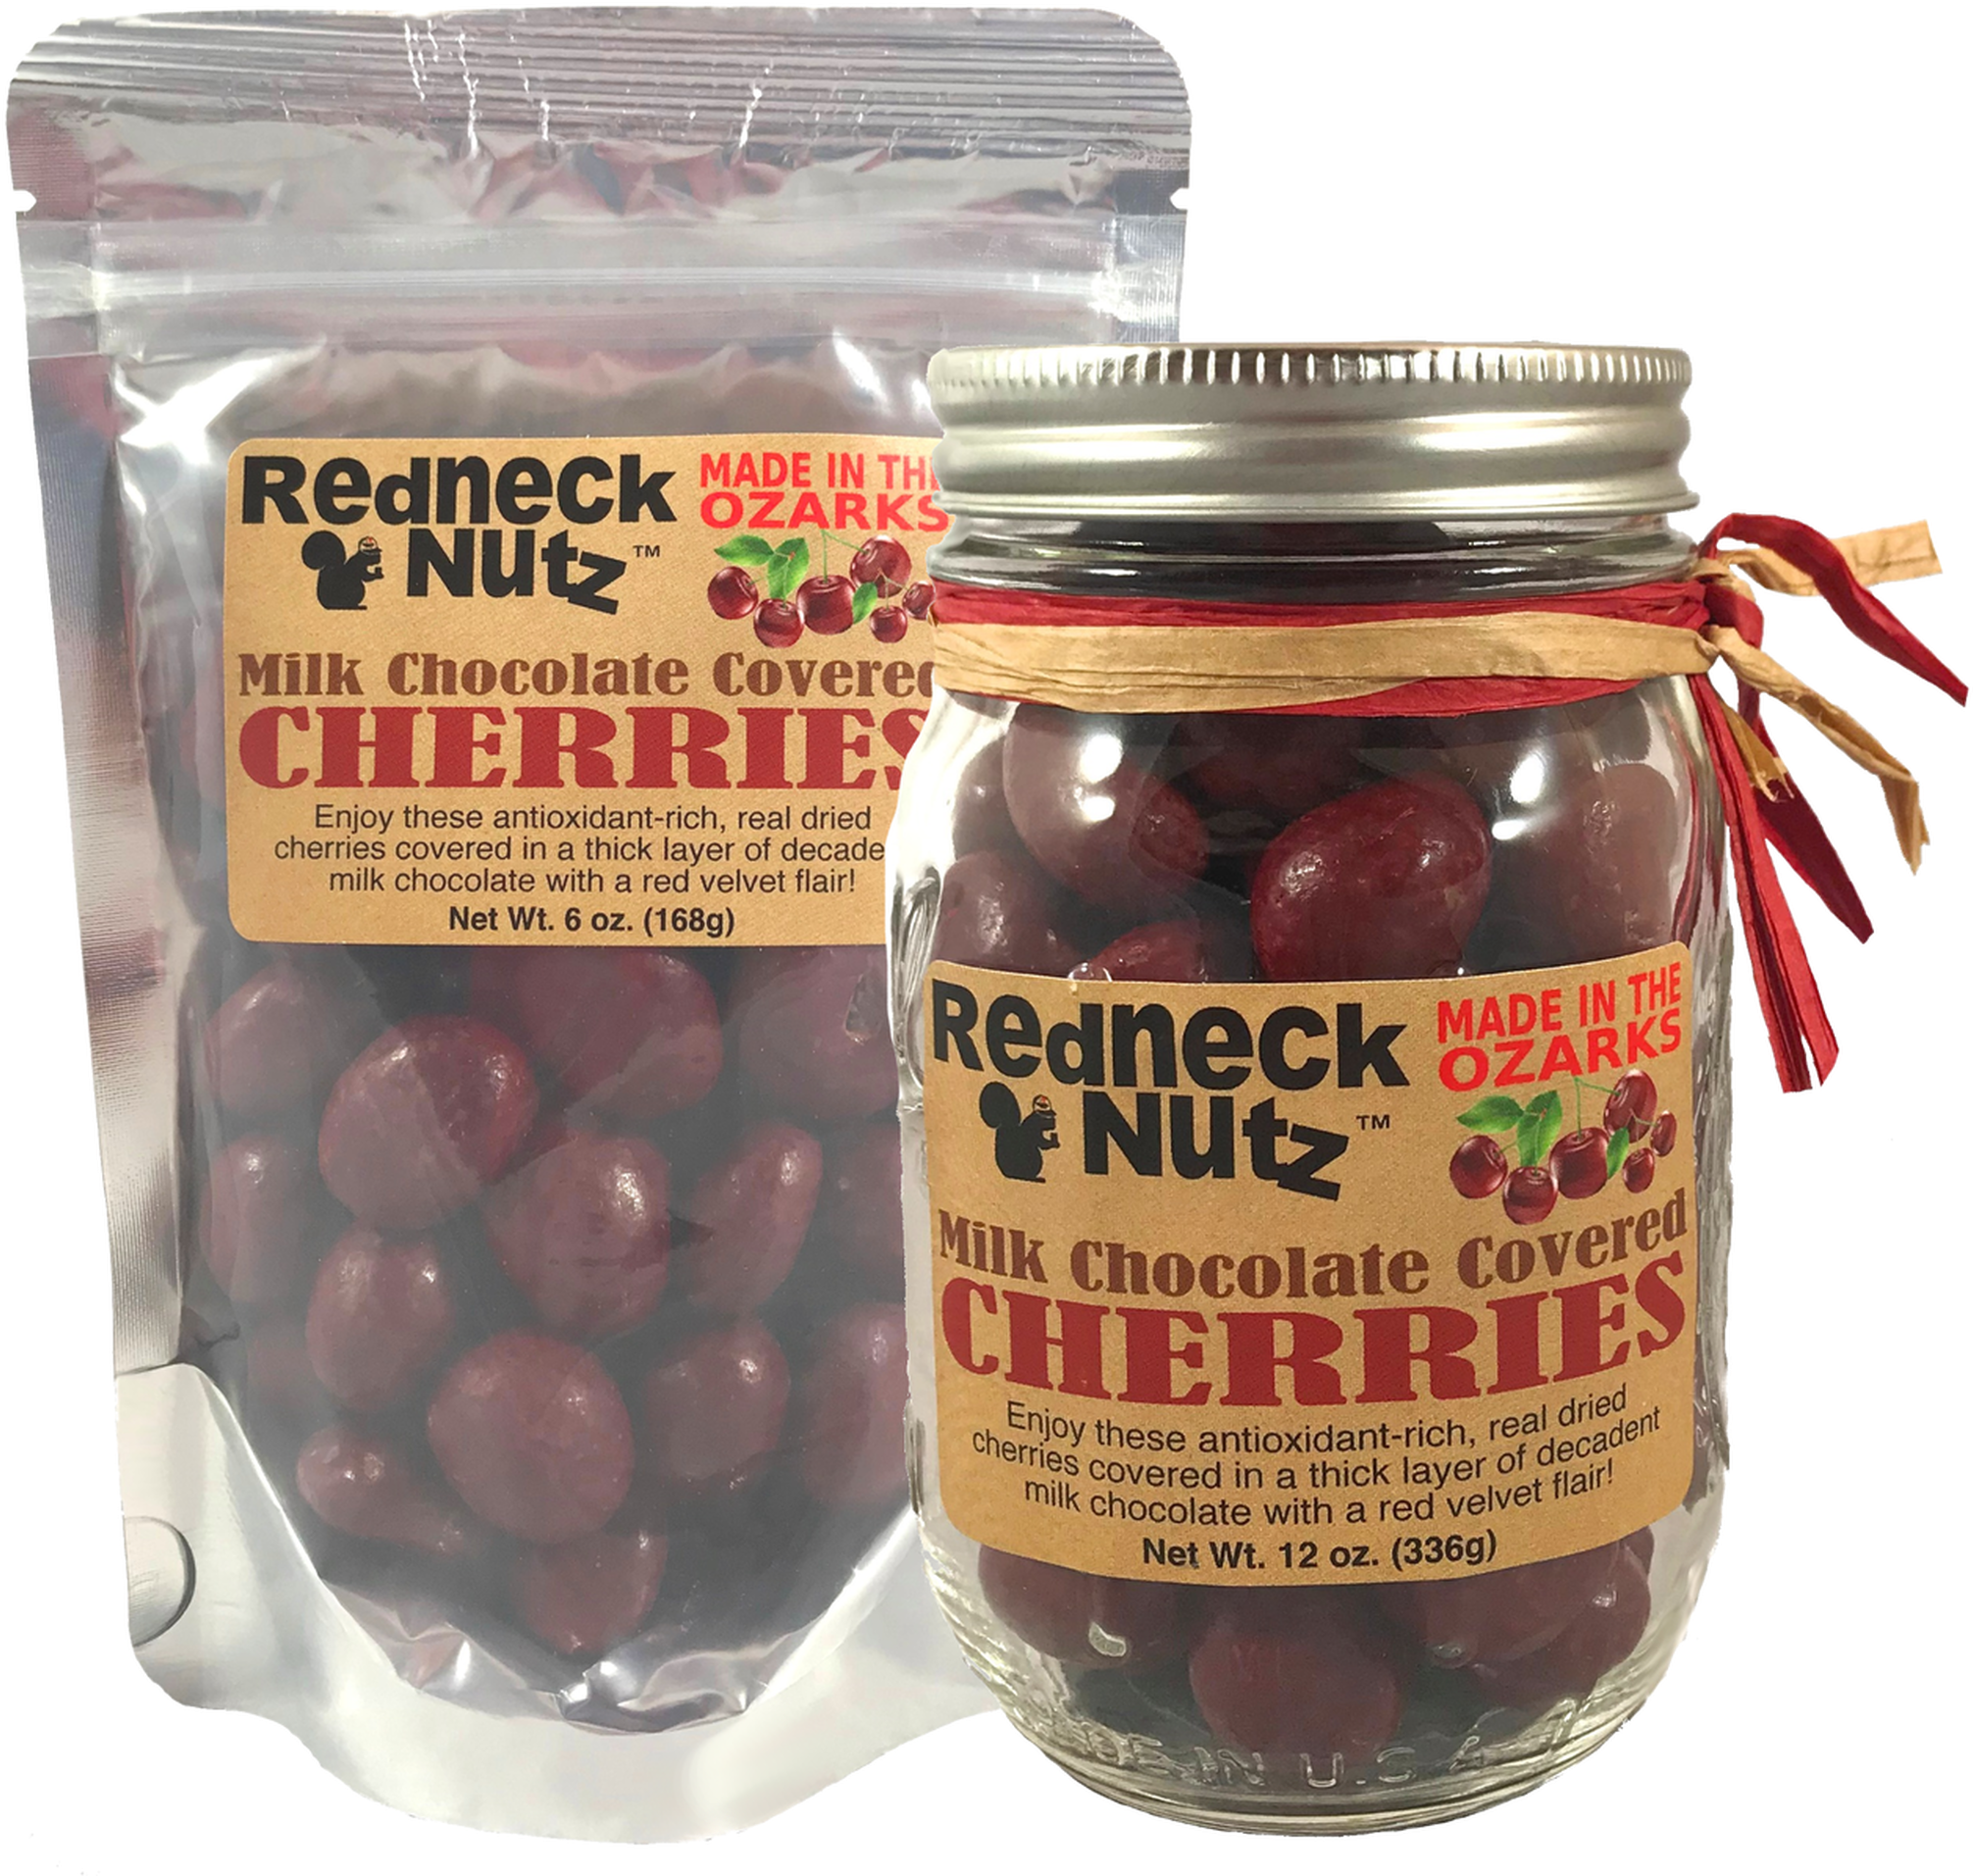 A Jar Of Chocolate Covered Cherries And A Bag Of Redneck Nuts